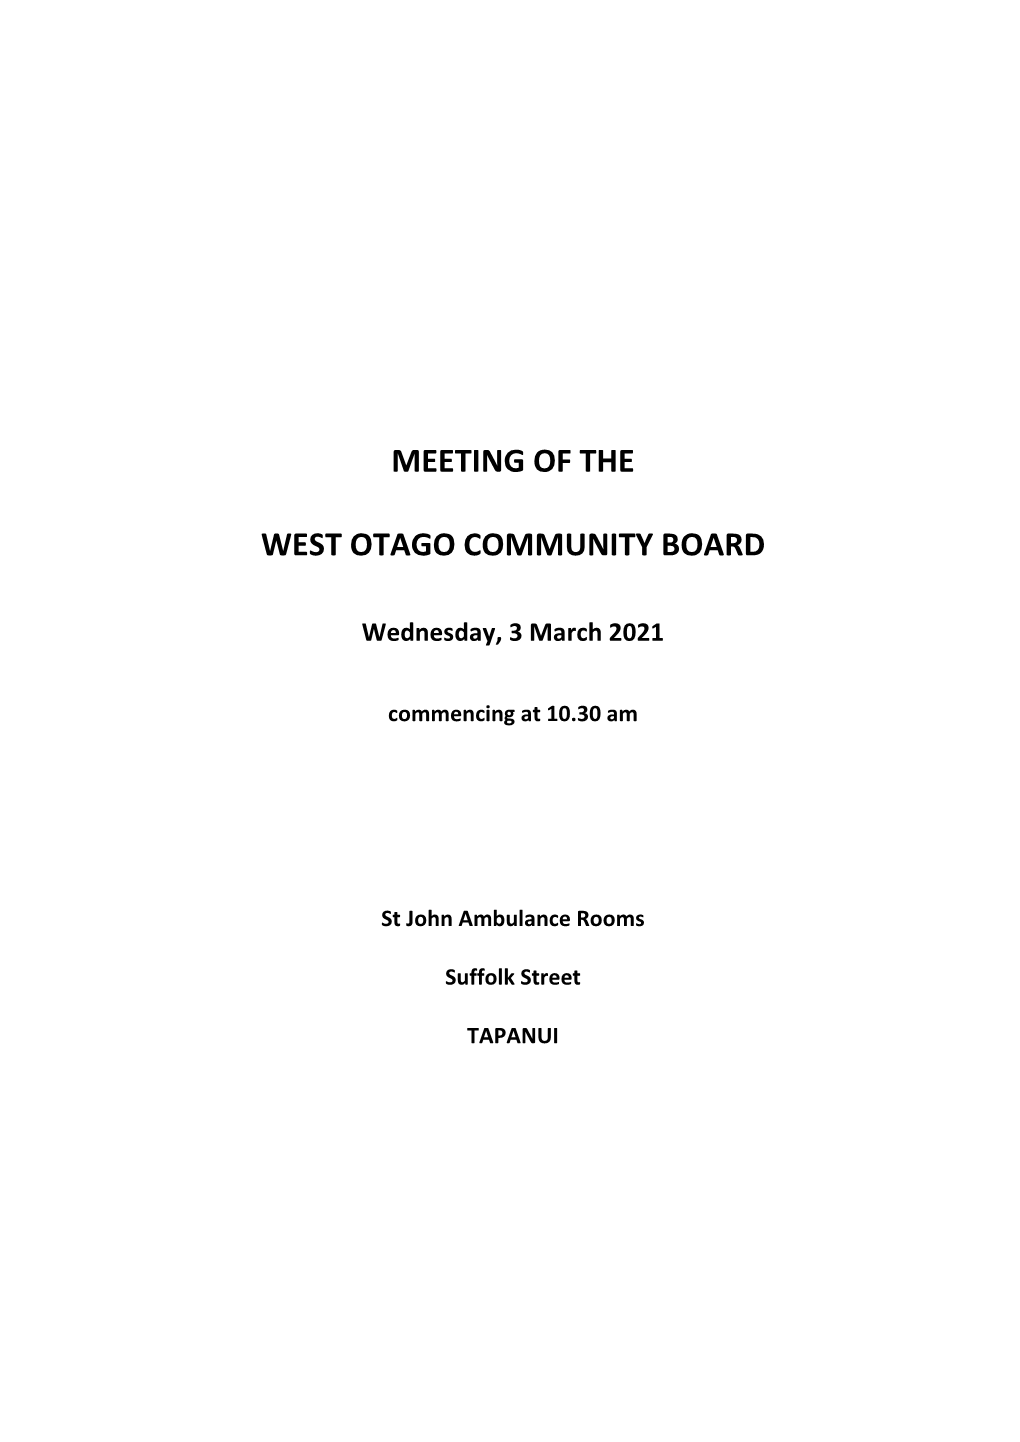 Meeting of the West Otago Community Board Will Be Held in the St John Ambulance Rooms, Suffolk Street, Tapanui on Wednesday, 3 March 2021, Commencing at 10.30 Am